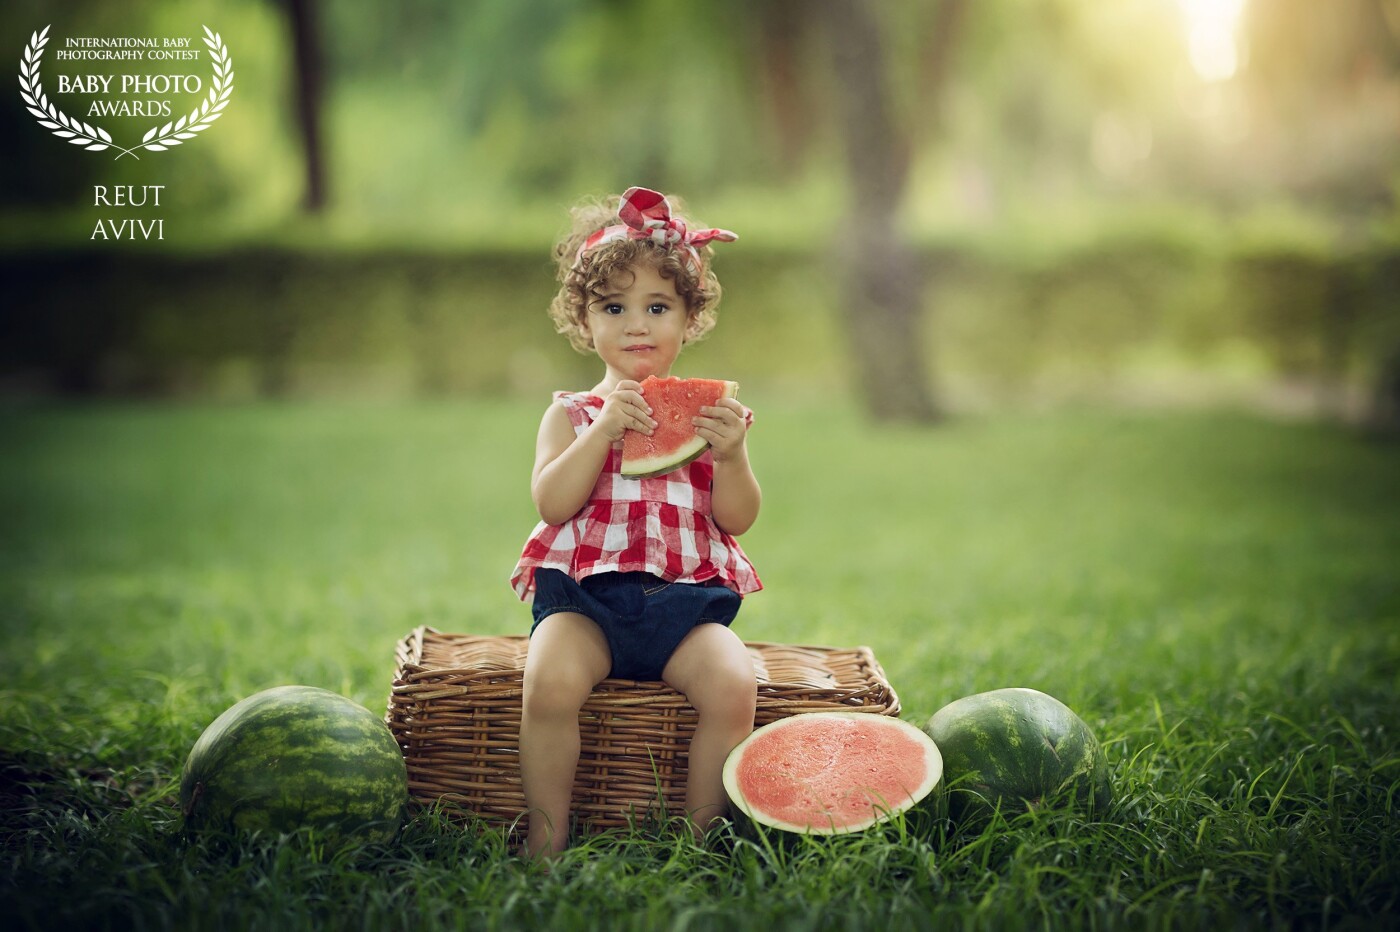 I always wanted to do this picture with the watermelon, of course, I tried it with my daughter and from the moment she touched the watermelon she didn't stop crying ... and then this princess came and did it perfectly!